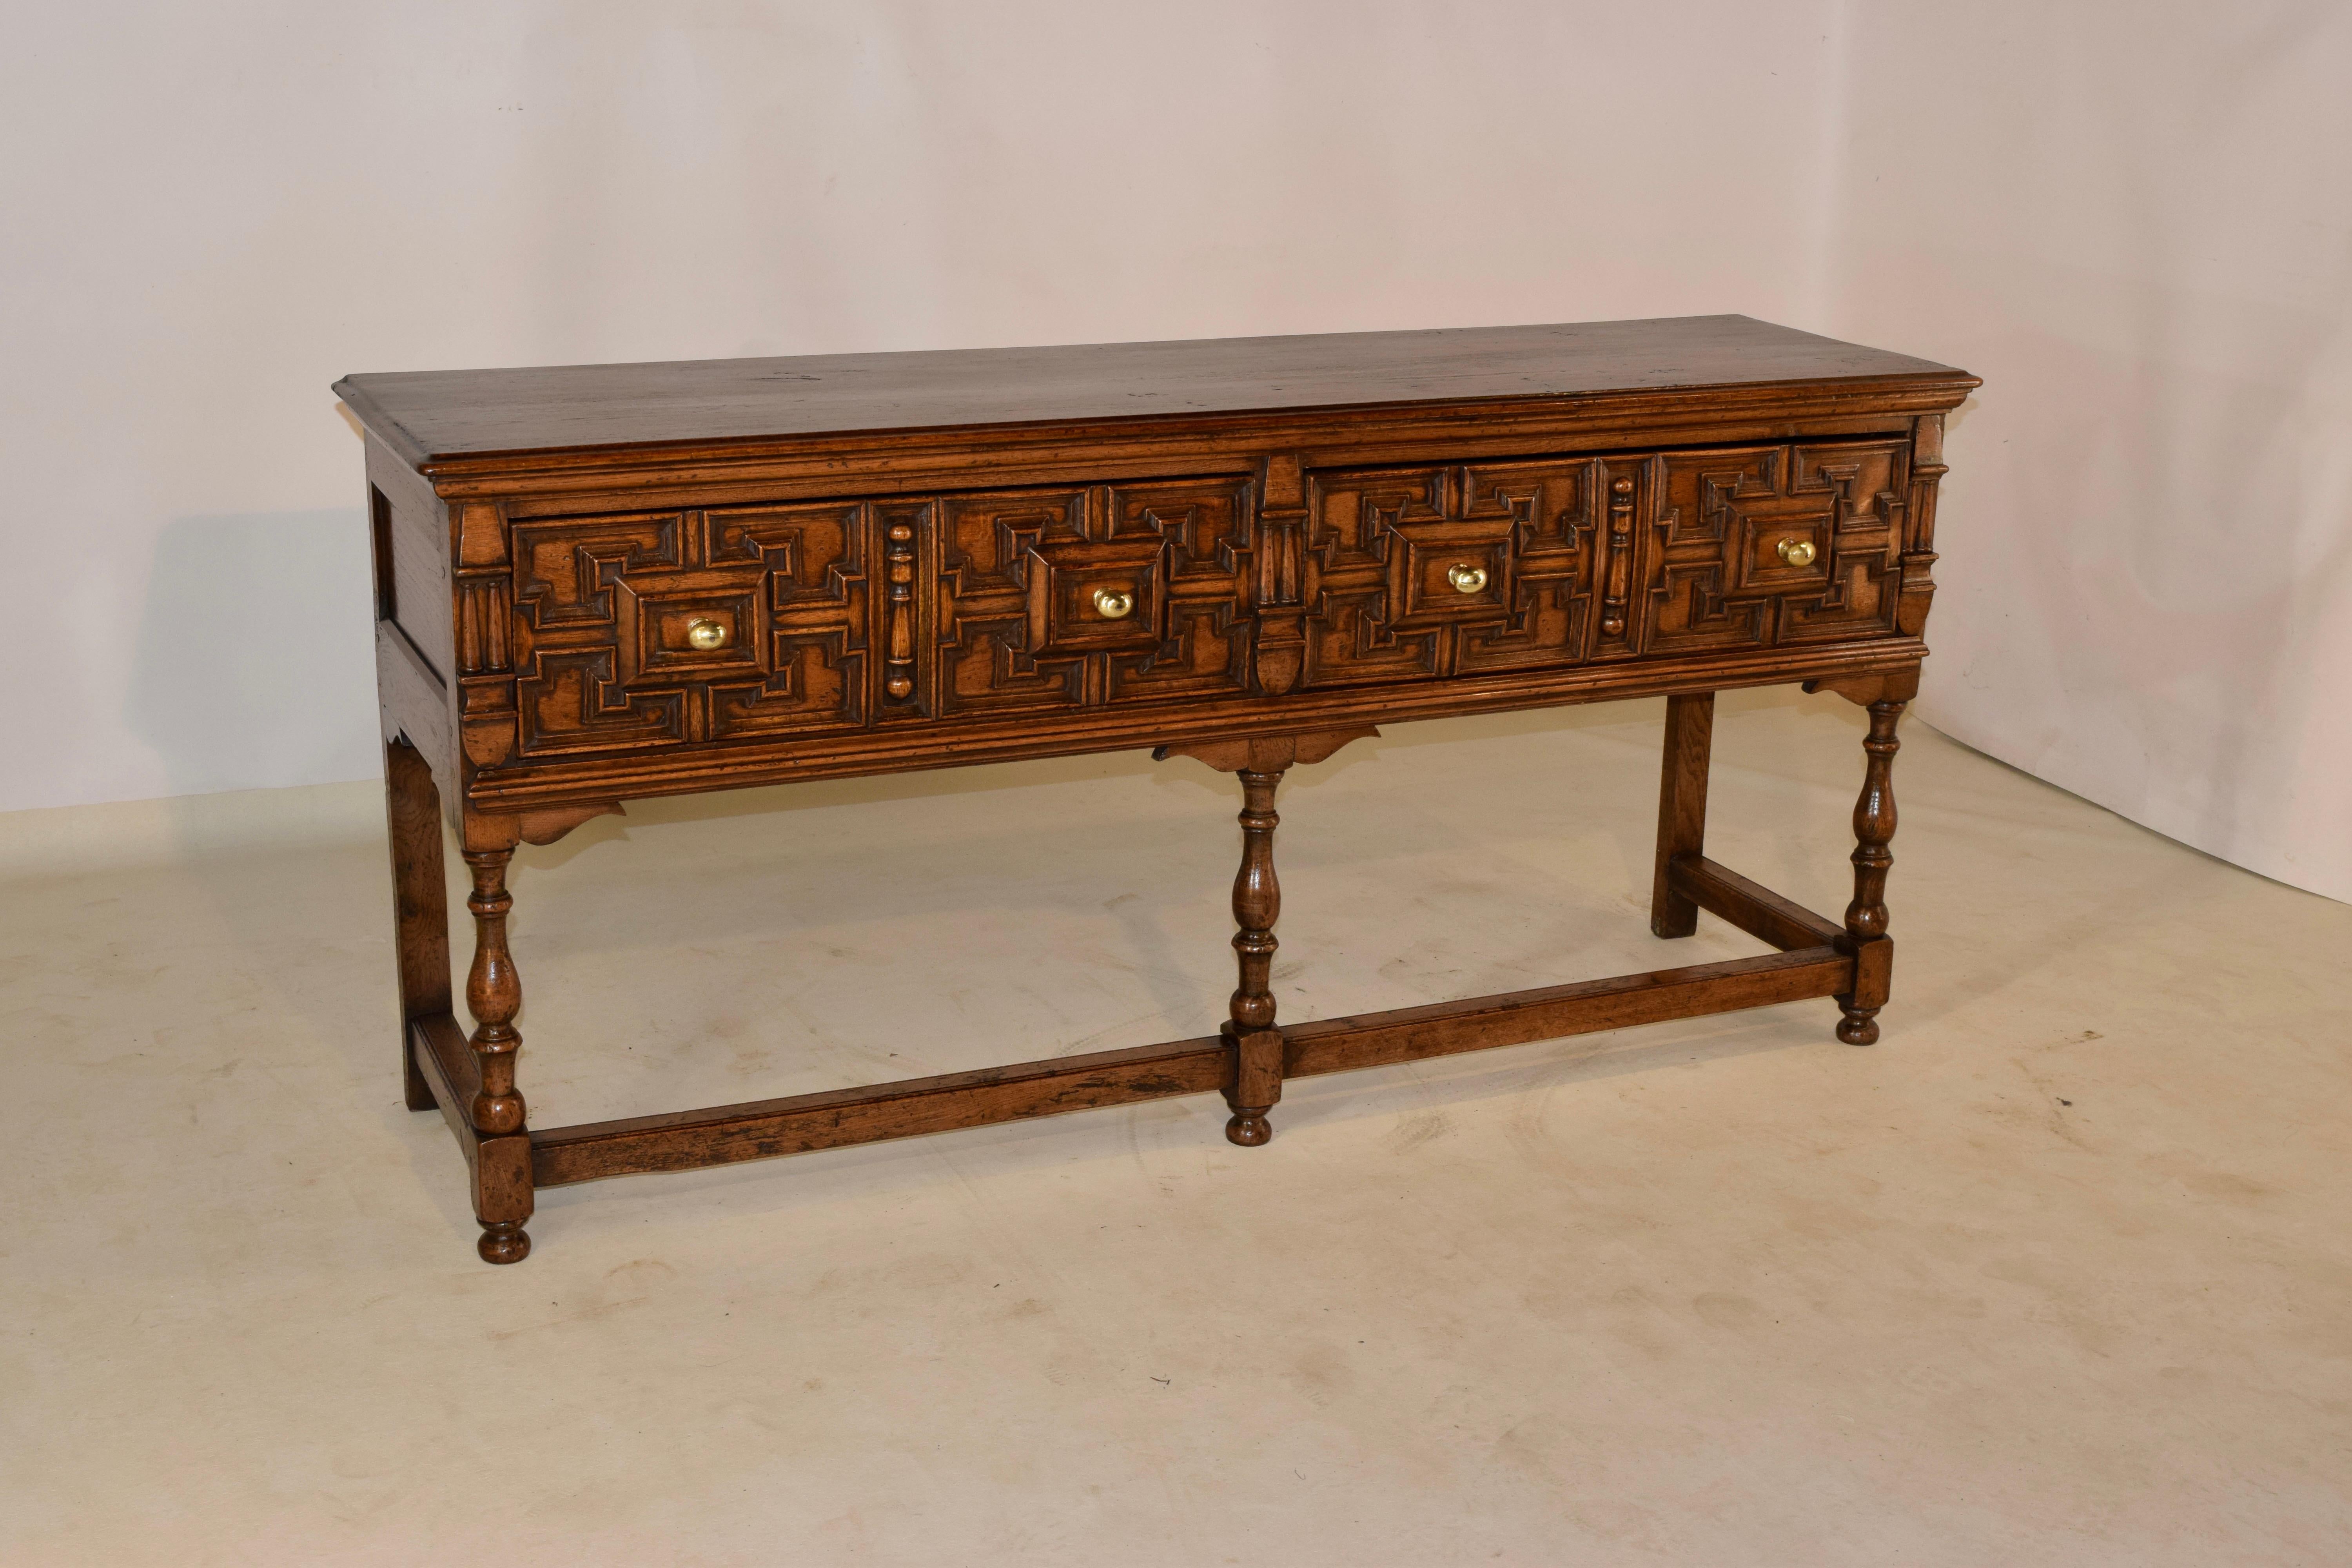 19th century oak sideboard from England with a beveled edge around the top, following down to paneled sides. There are two drawers, both with raised geometric panels and flanked by decorative applied moldings. The piece is supported on simple legs